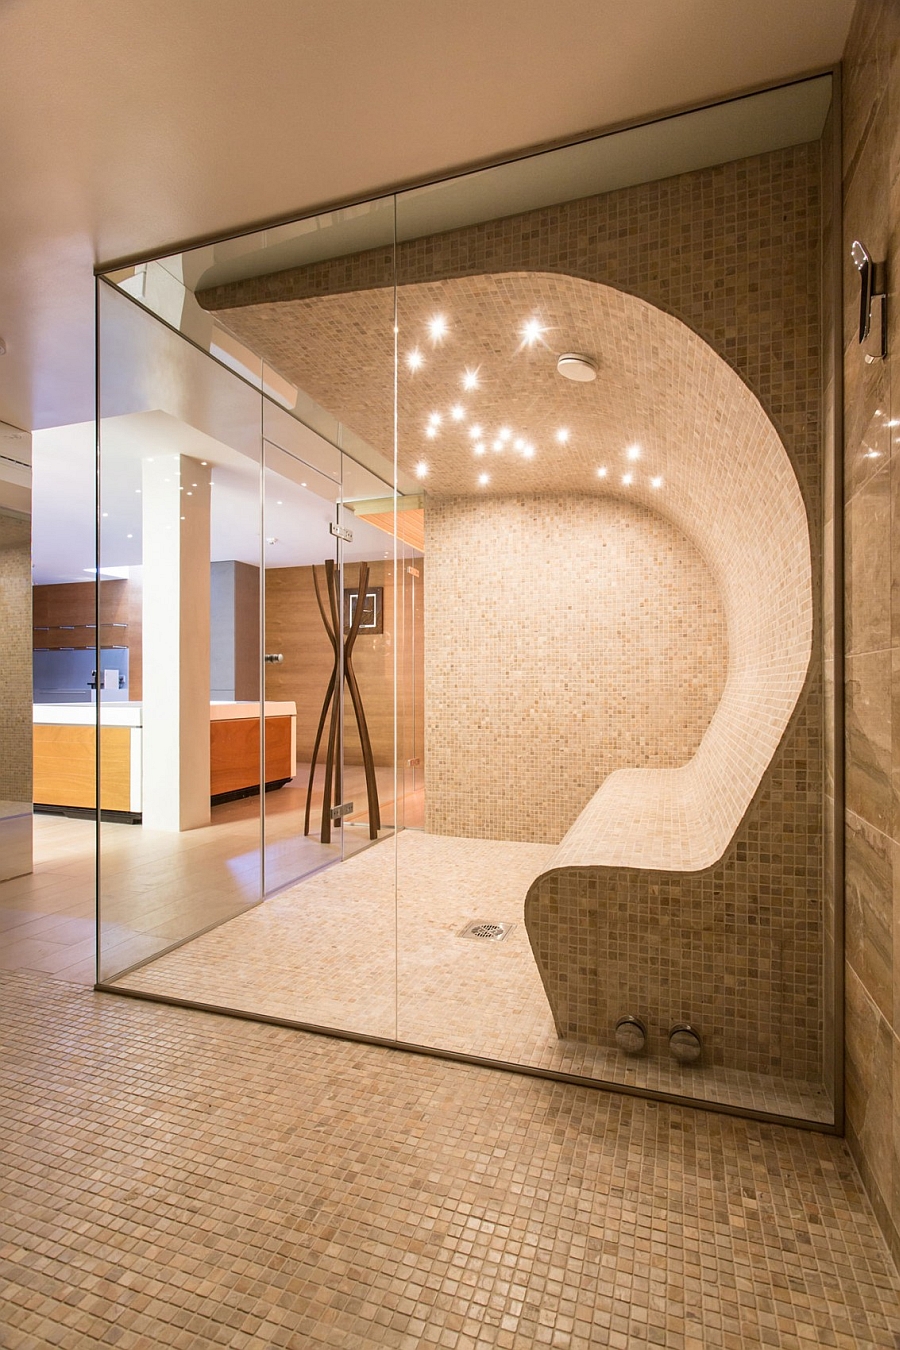 Exclusive Modern Built In Shower Design With Curve Wall To Ceiling Panel Board Bathed With Contemporary Light Architecture